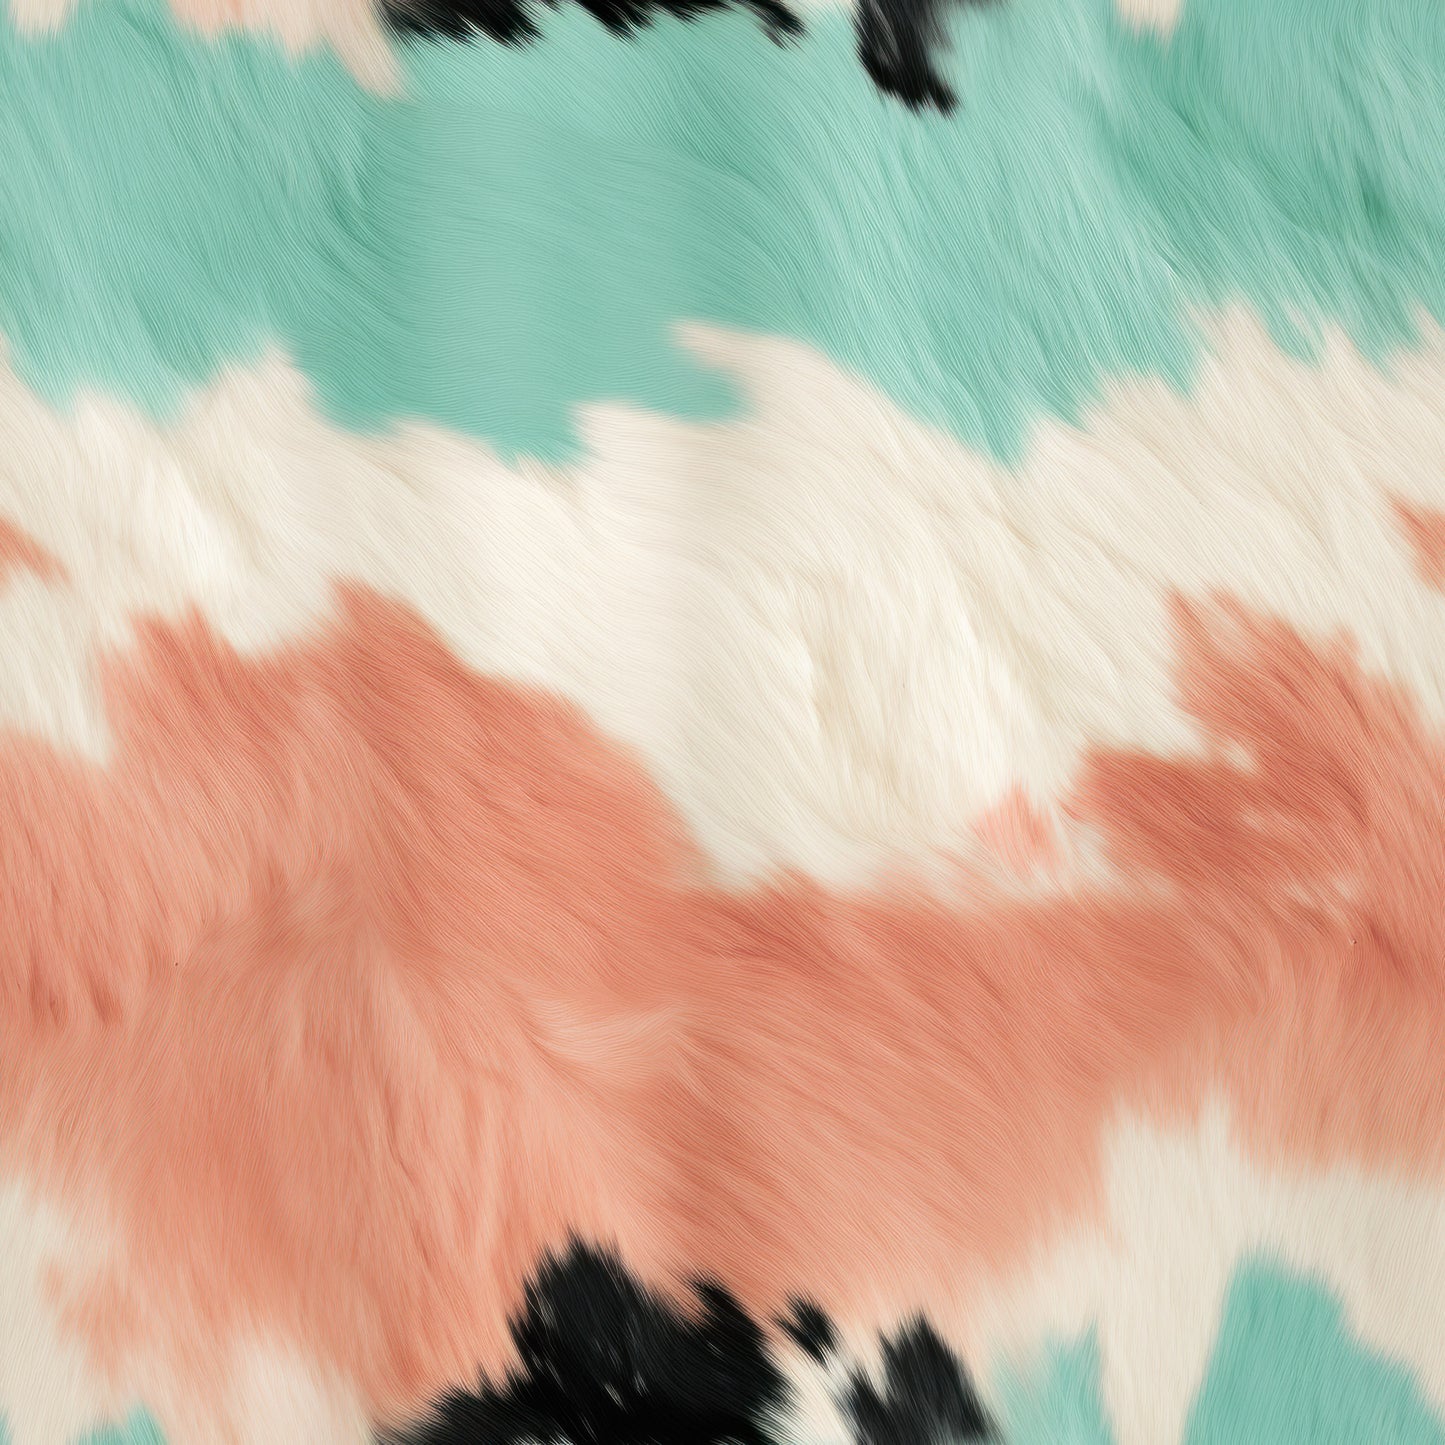 PEACH AND MINT COWHIDE - MULTIPLE VARIATIONS